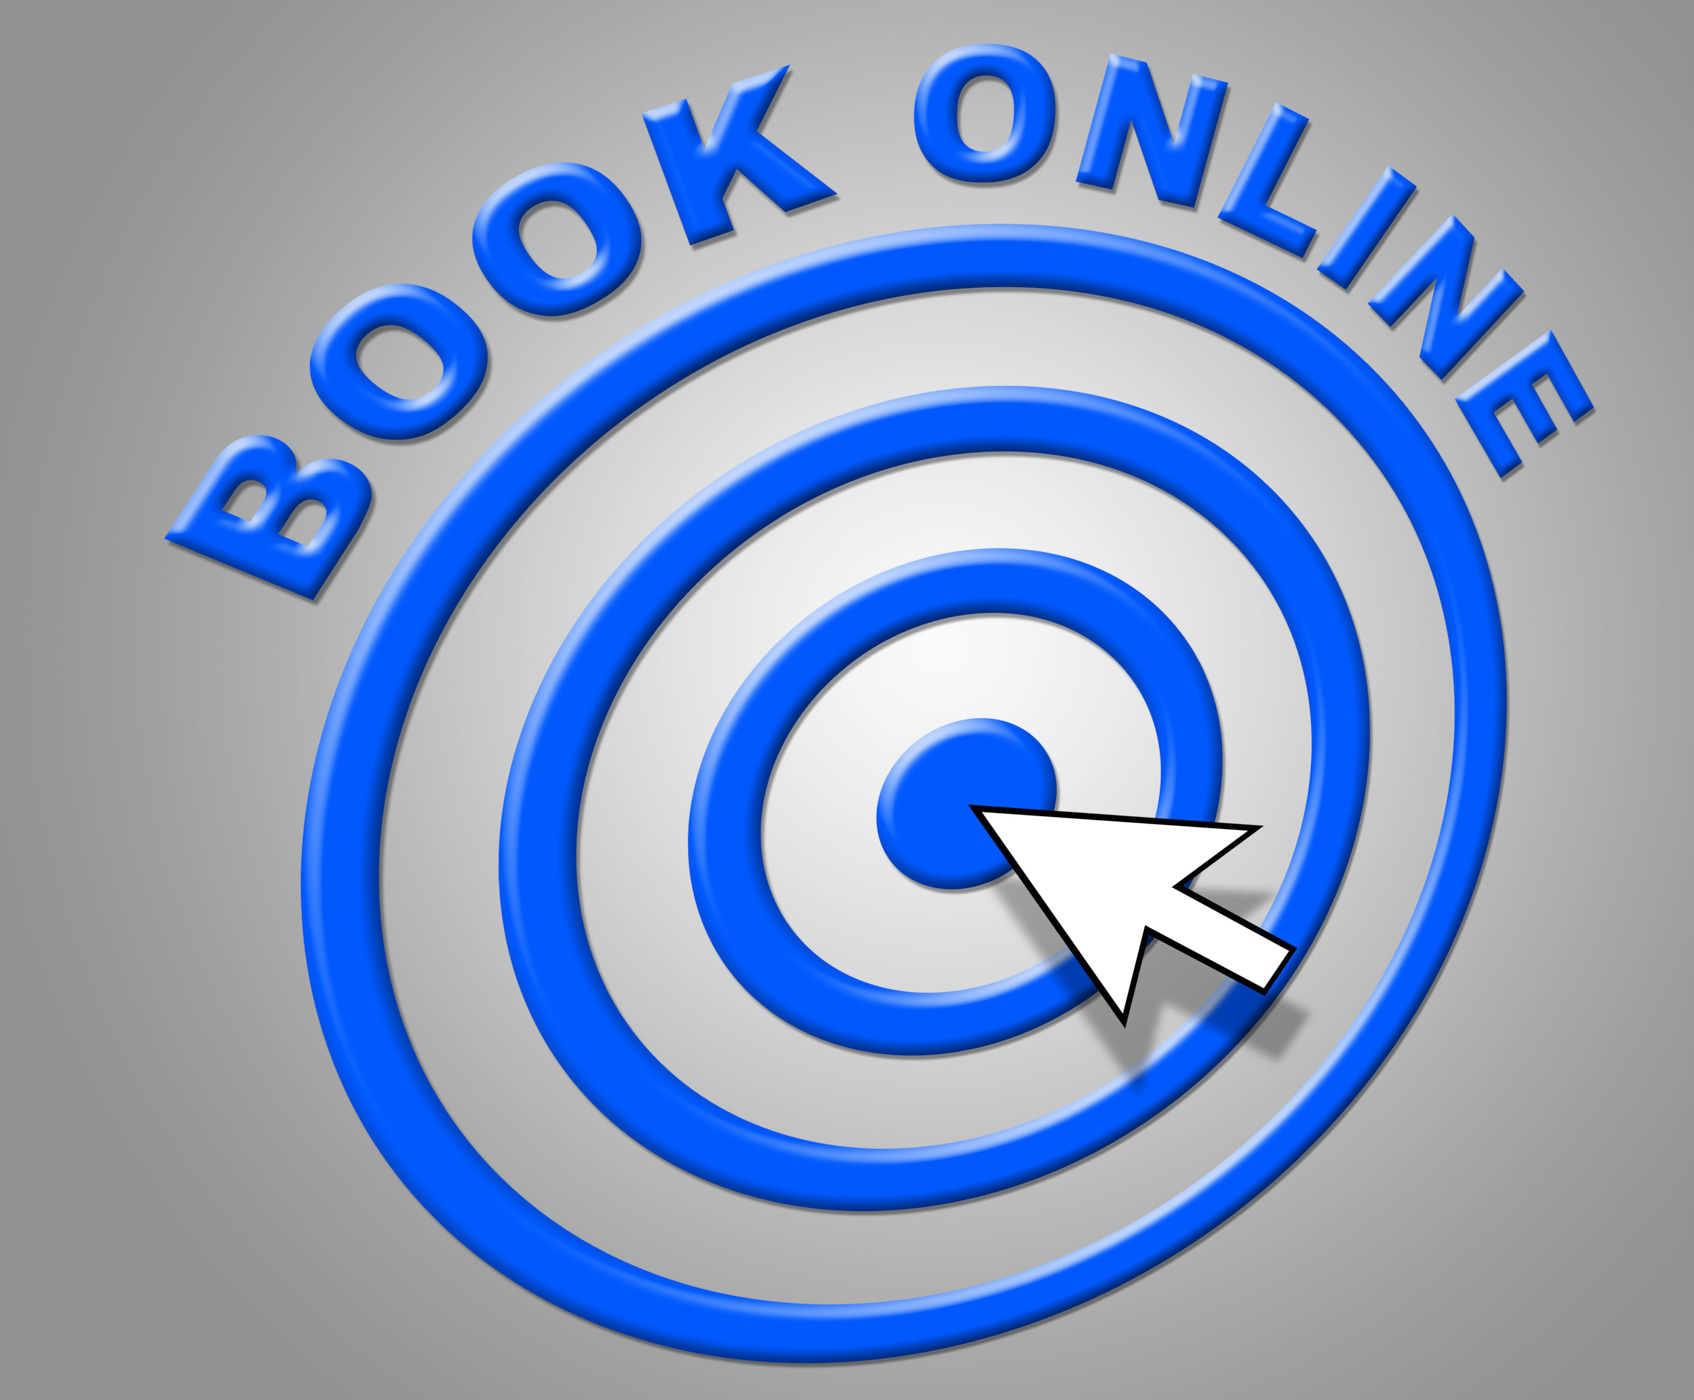 Book online represents world wide web and booked photo